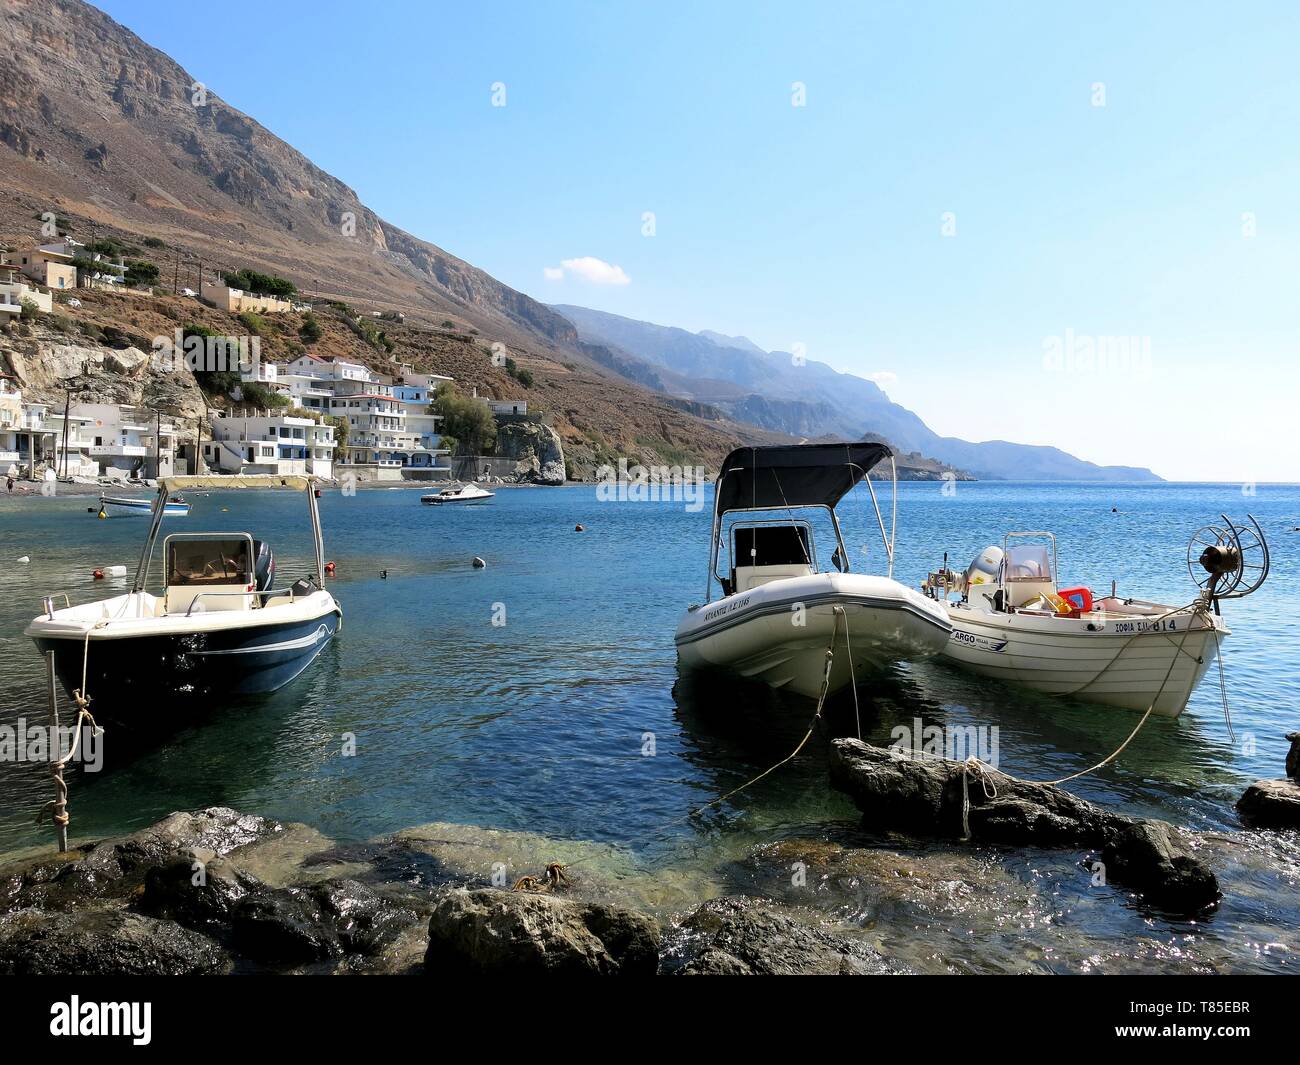 3 Ekklisies, small fishing village and vacation destination for locals, southern Crete, Greece. Stock Photo